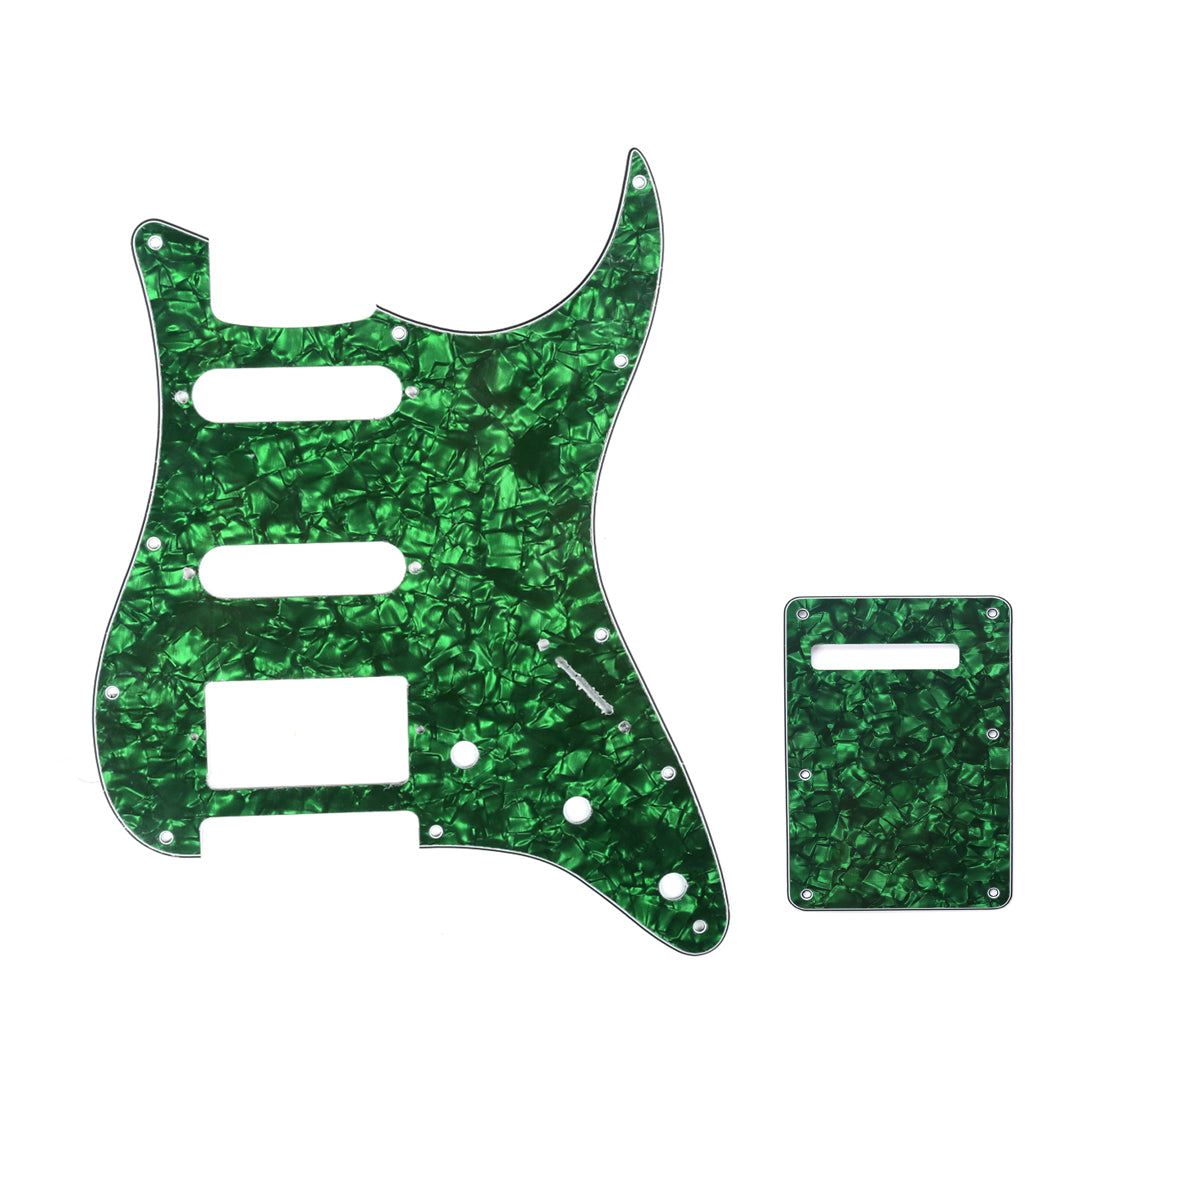 Musiclily SSH 11 Hole Strat Guitar Pickguard and BackPlate Set for Fender USA/Mexican Standard Stratocaster Modern Style, 4Ply Green Pearl